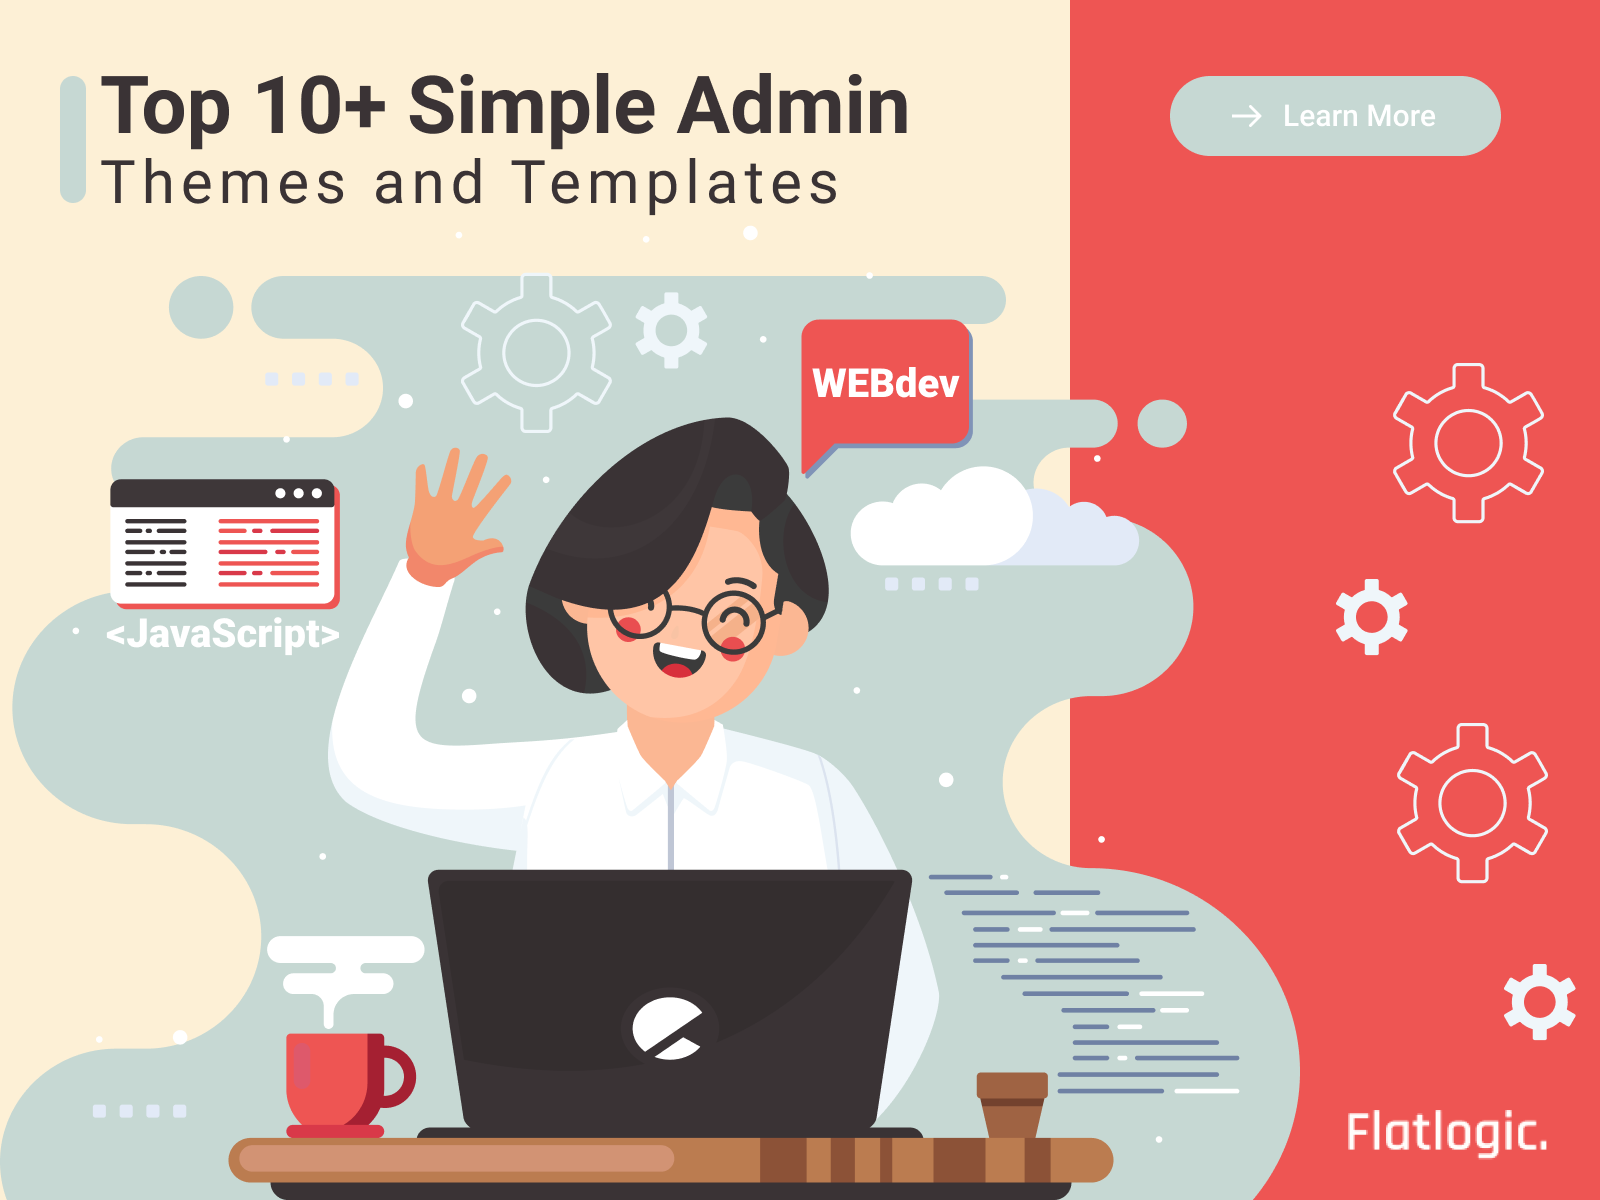 Top 10+ Simple Admin Themes and Templates - Flatlogic Blog